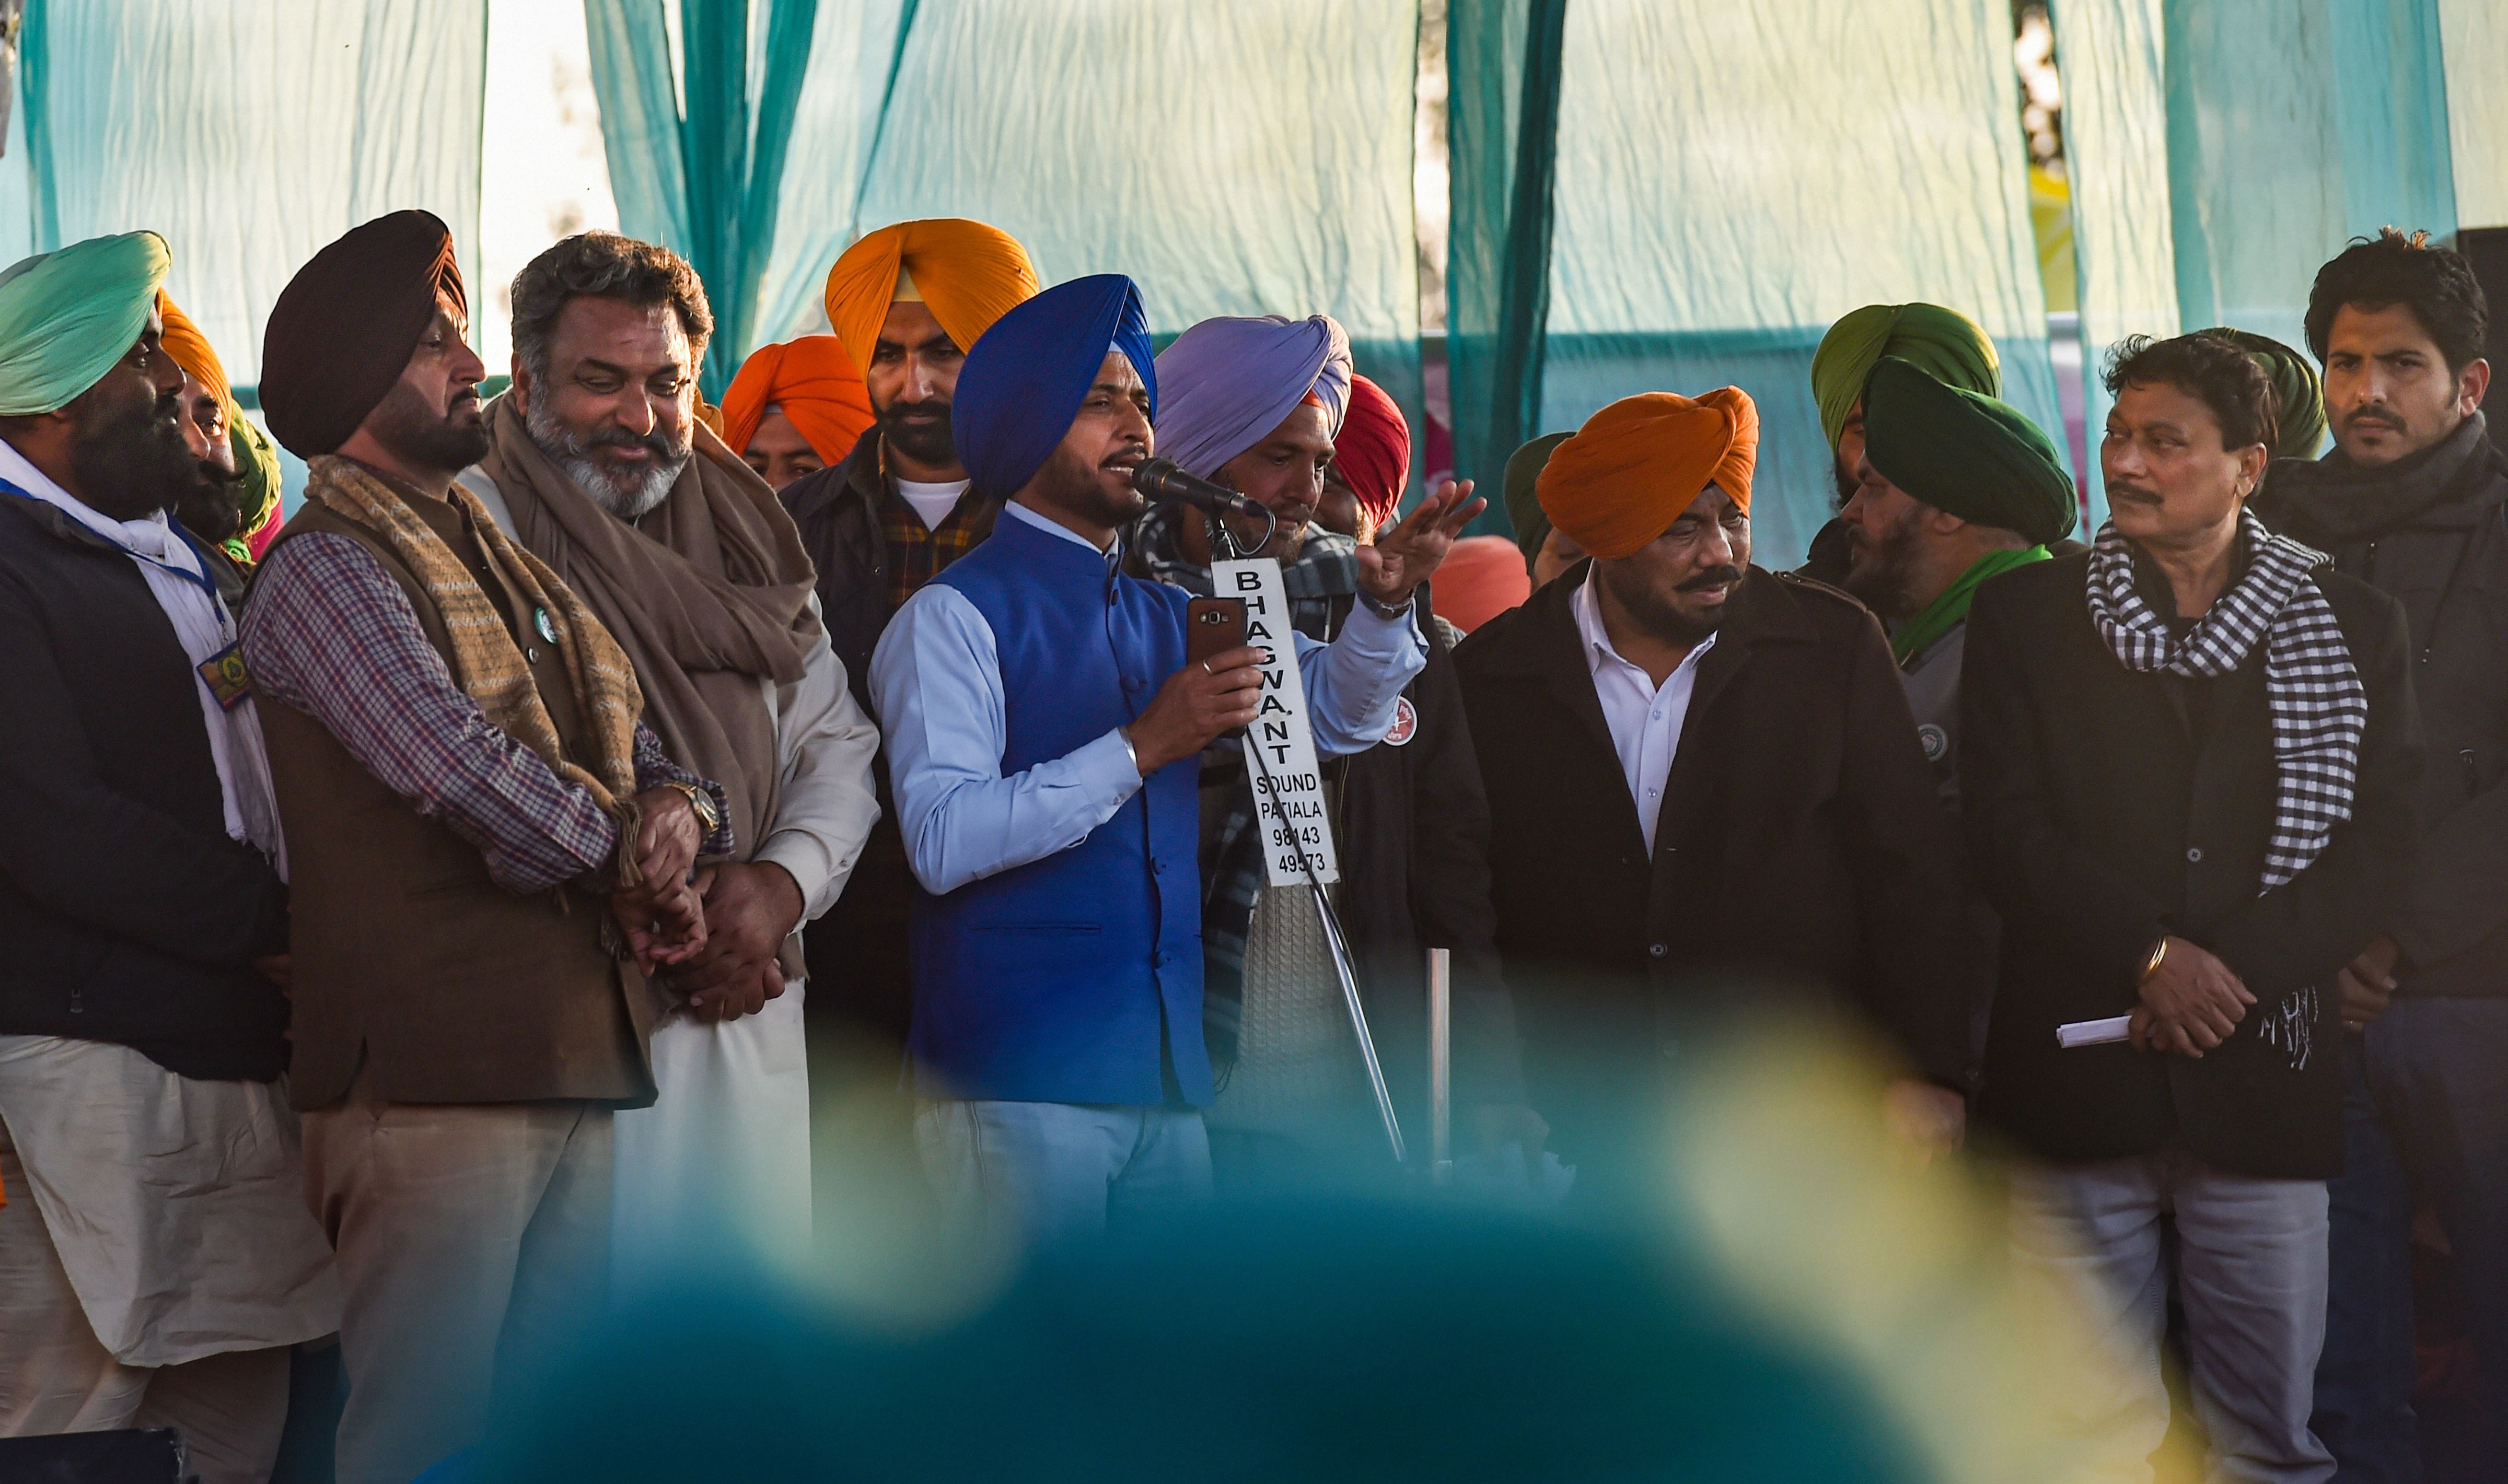 Punjabi actors and singers at Singhu border during their sit-in protest against the Centre's farm reform laws. Credit: PTI Photo